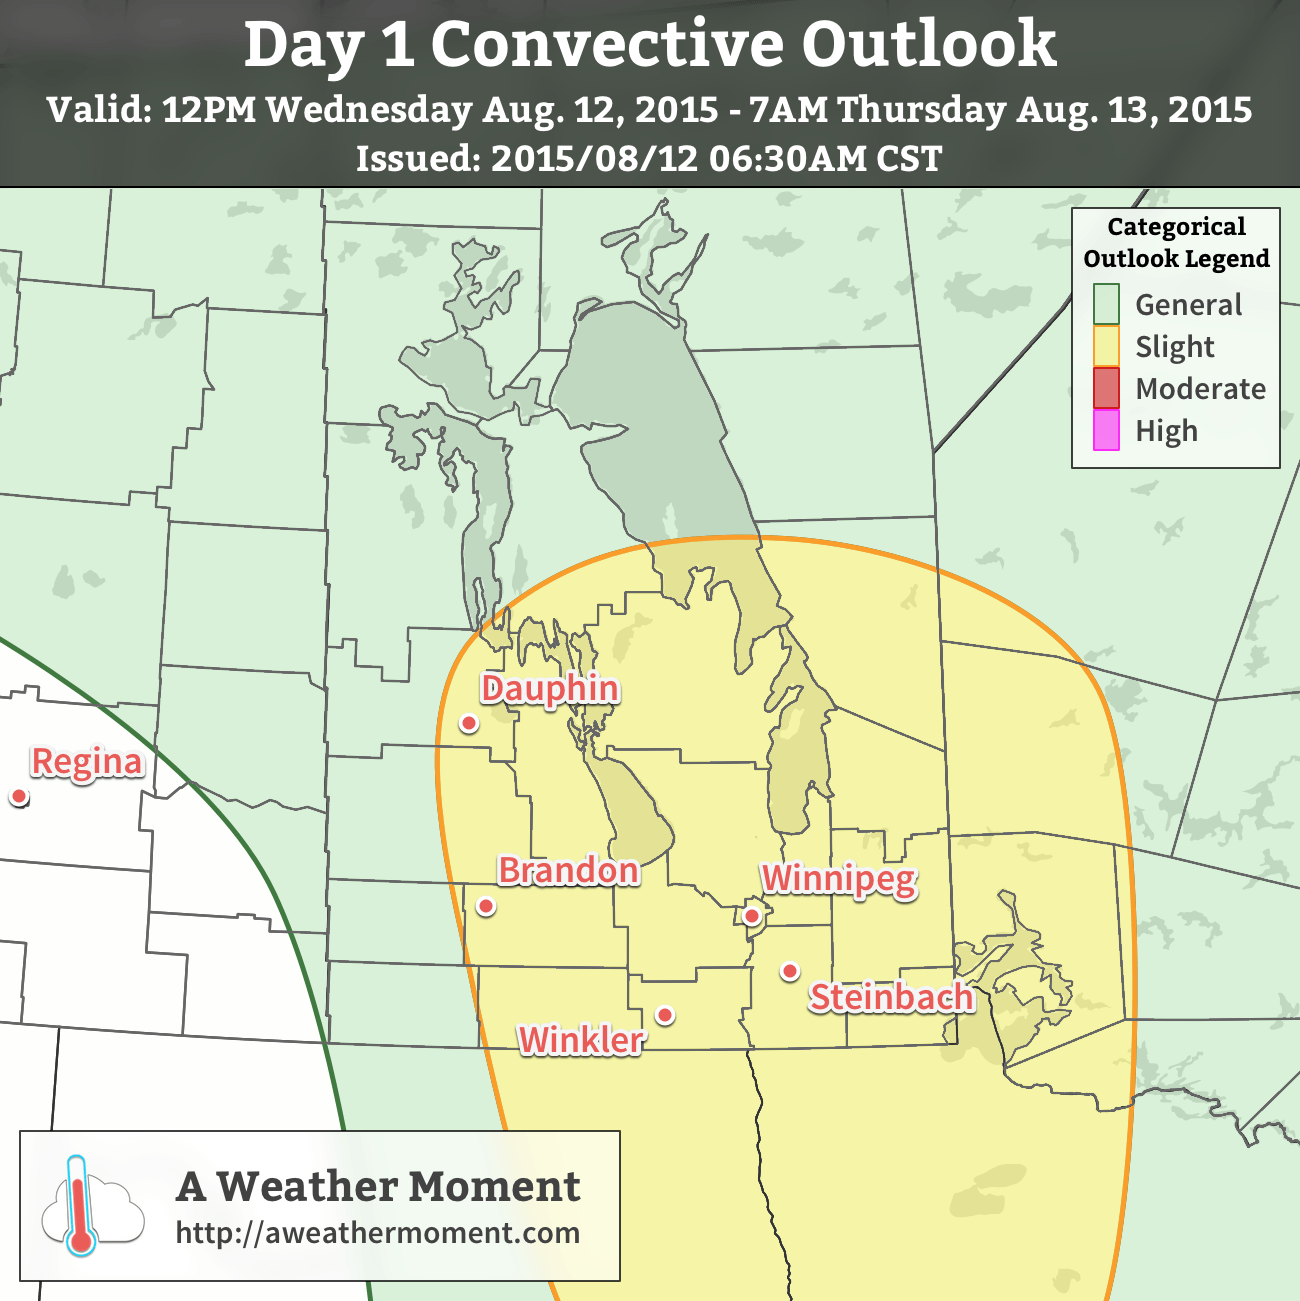 AWM Day 1 Convective Outlook for August 12, 2015